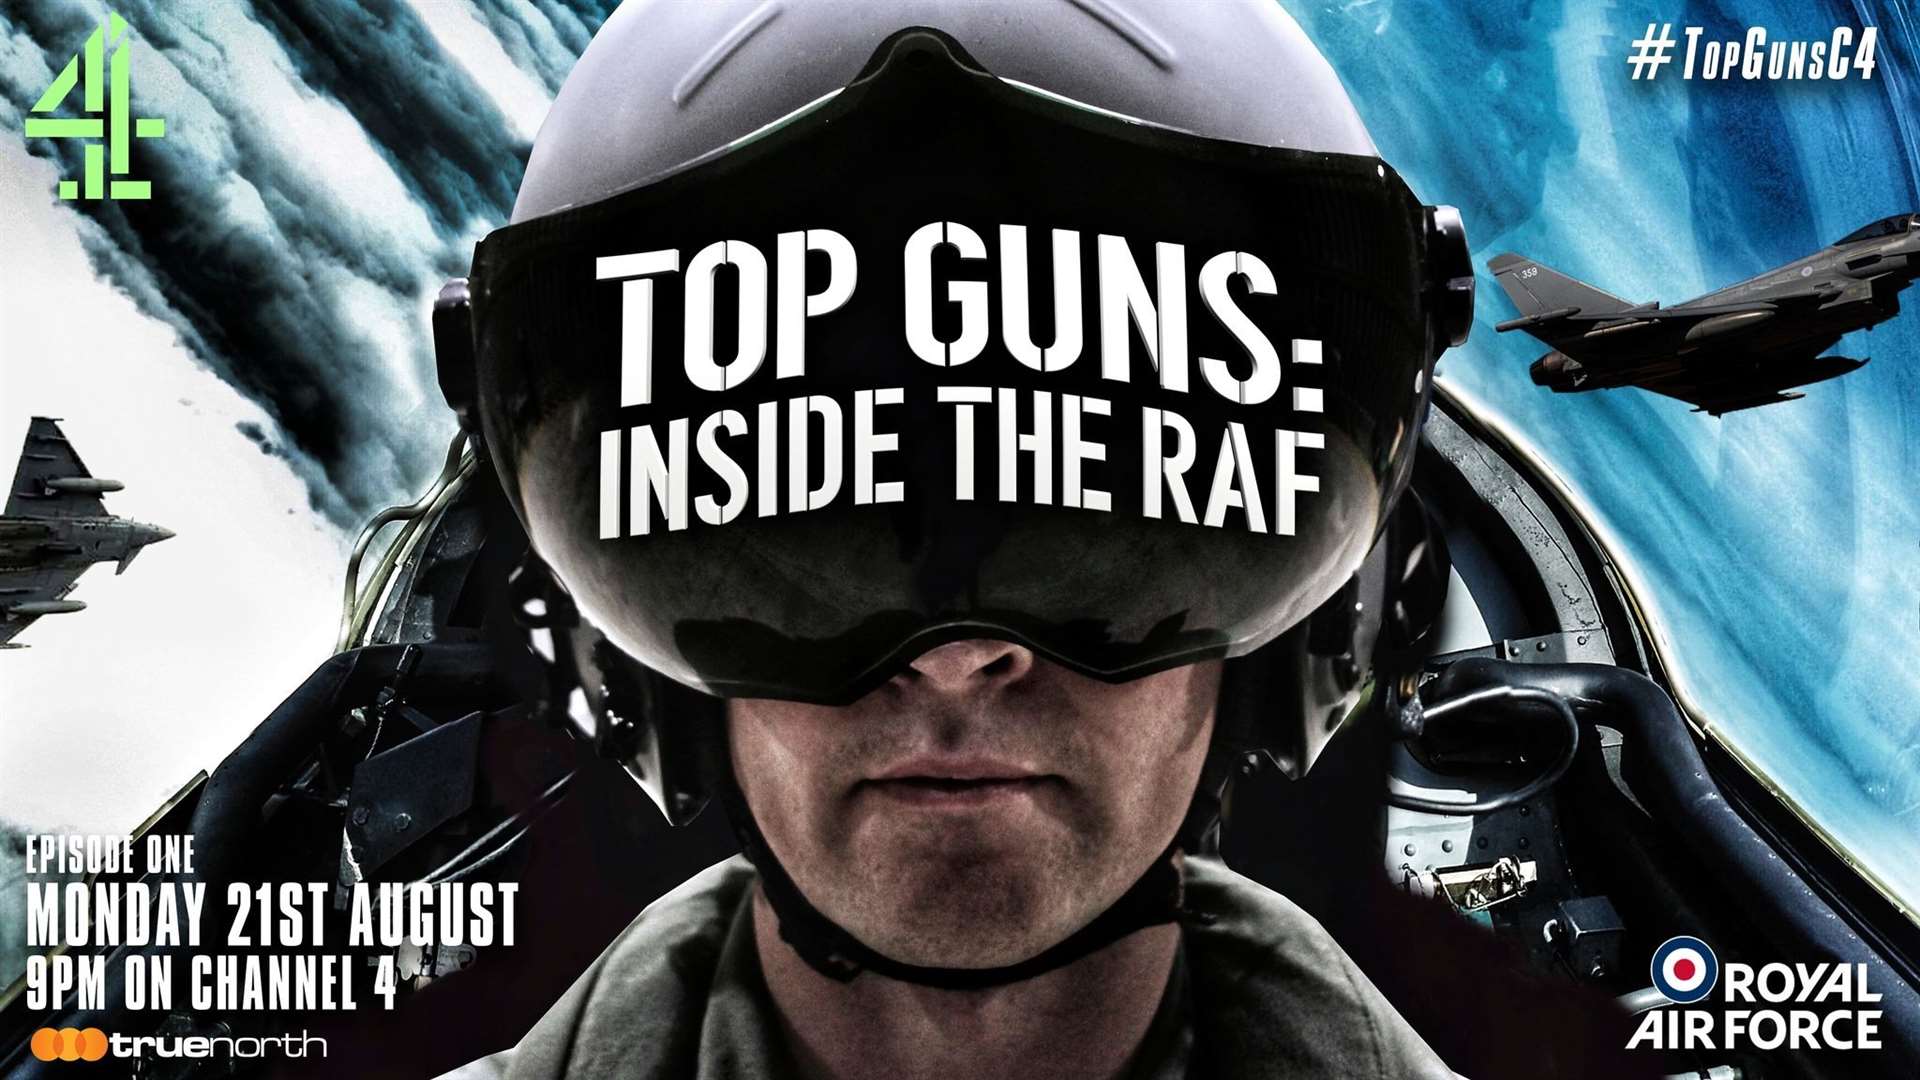 The six part series will feature the RAF's frontline fighter jet pilots and support staff.